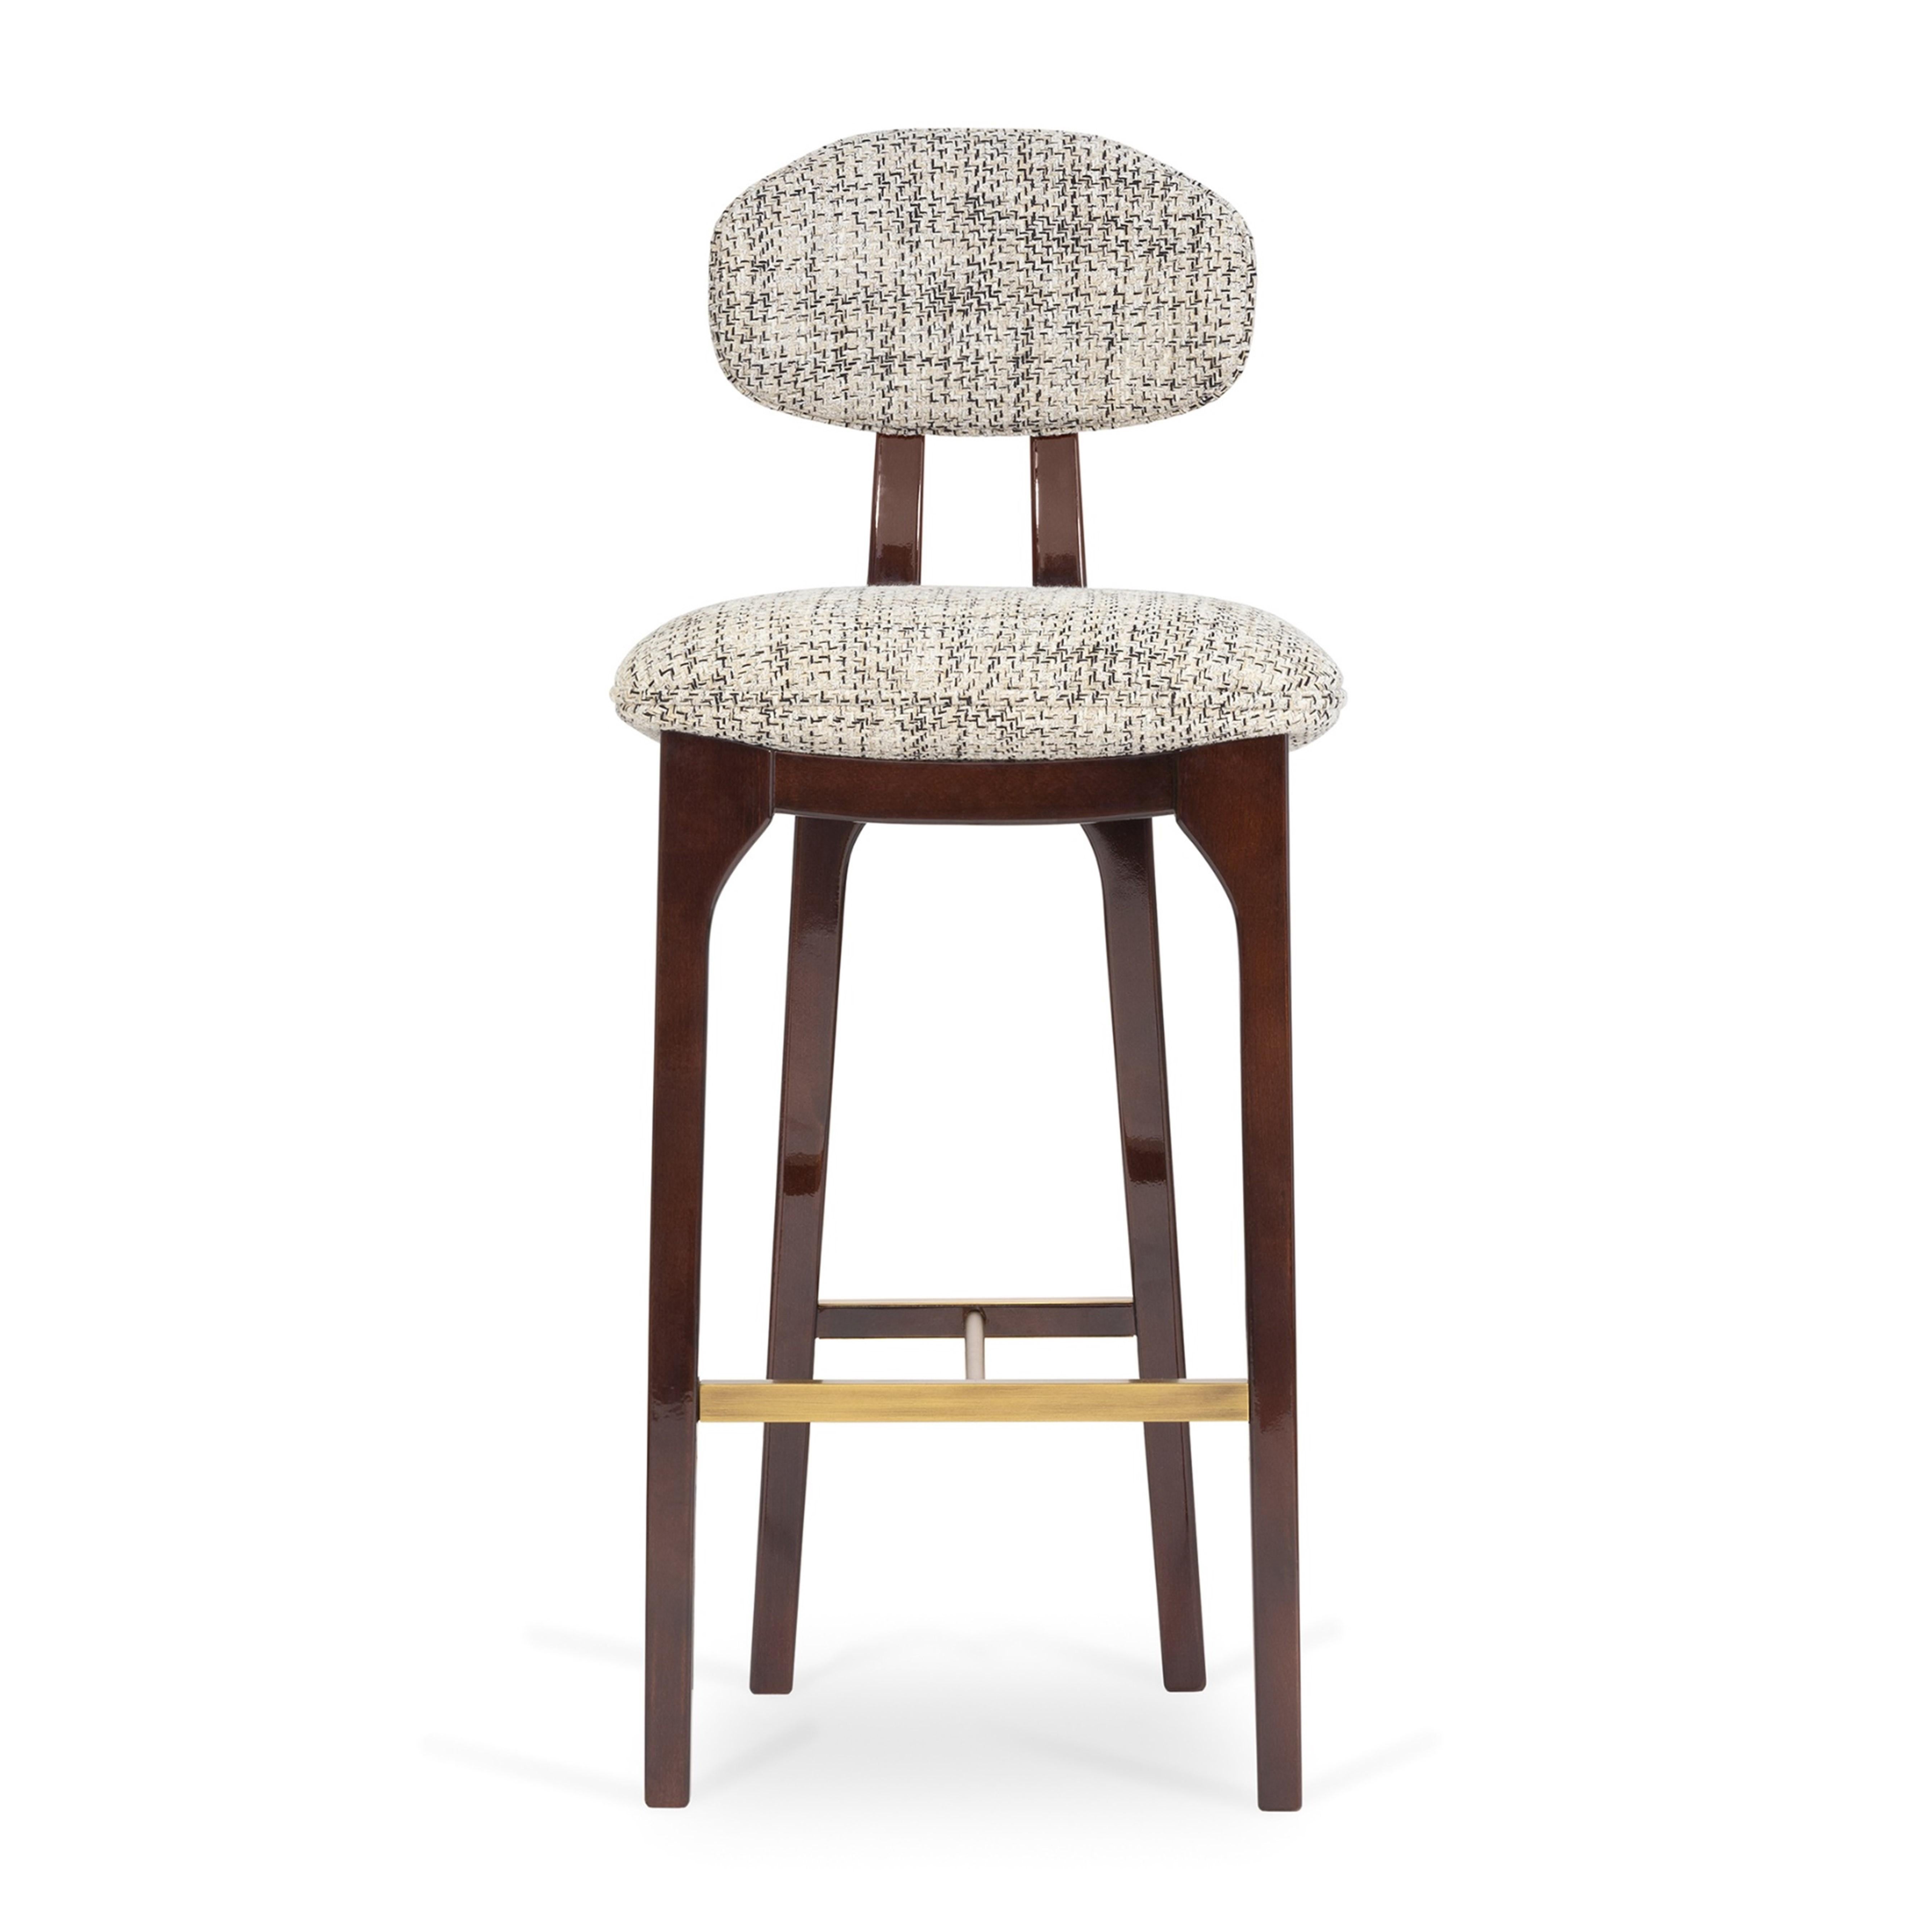 Silhouette is a surreal reminiscence of a woman’s sensual curves that arise designed in an eye catching counter stool.

The joint dimension of people and objects strongly influenced the Silhouette counter stool, whose elegant wooden structure